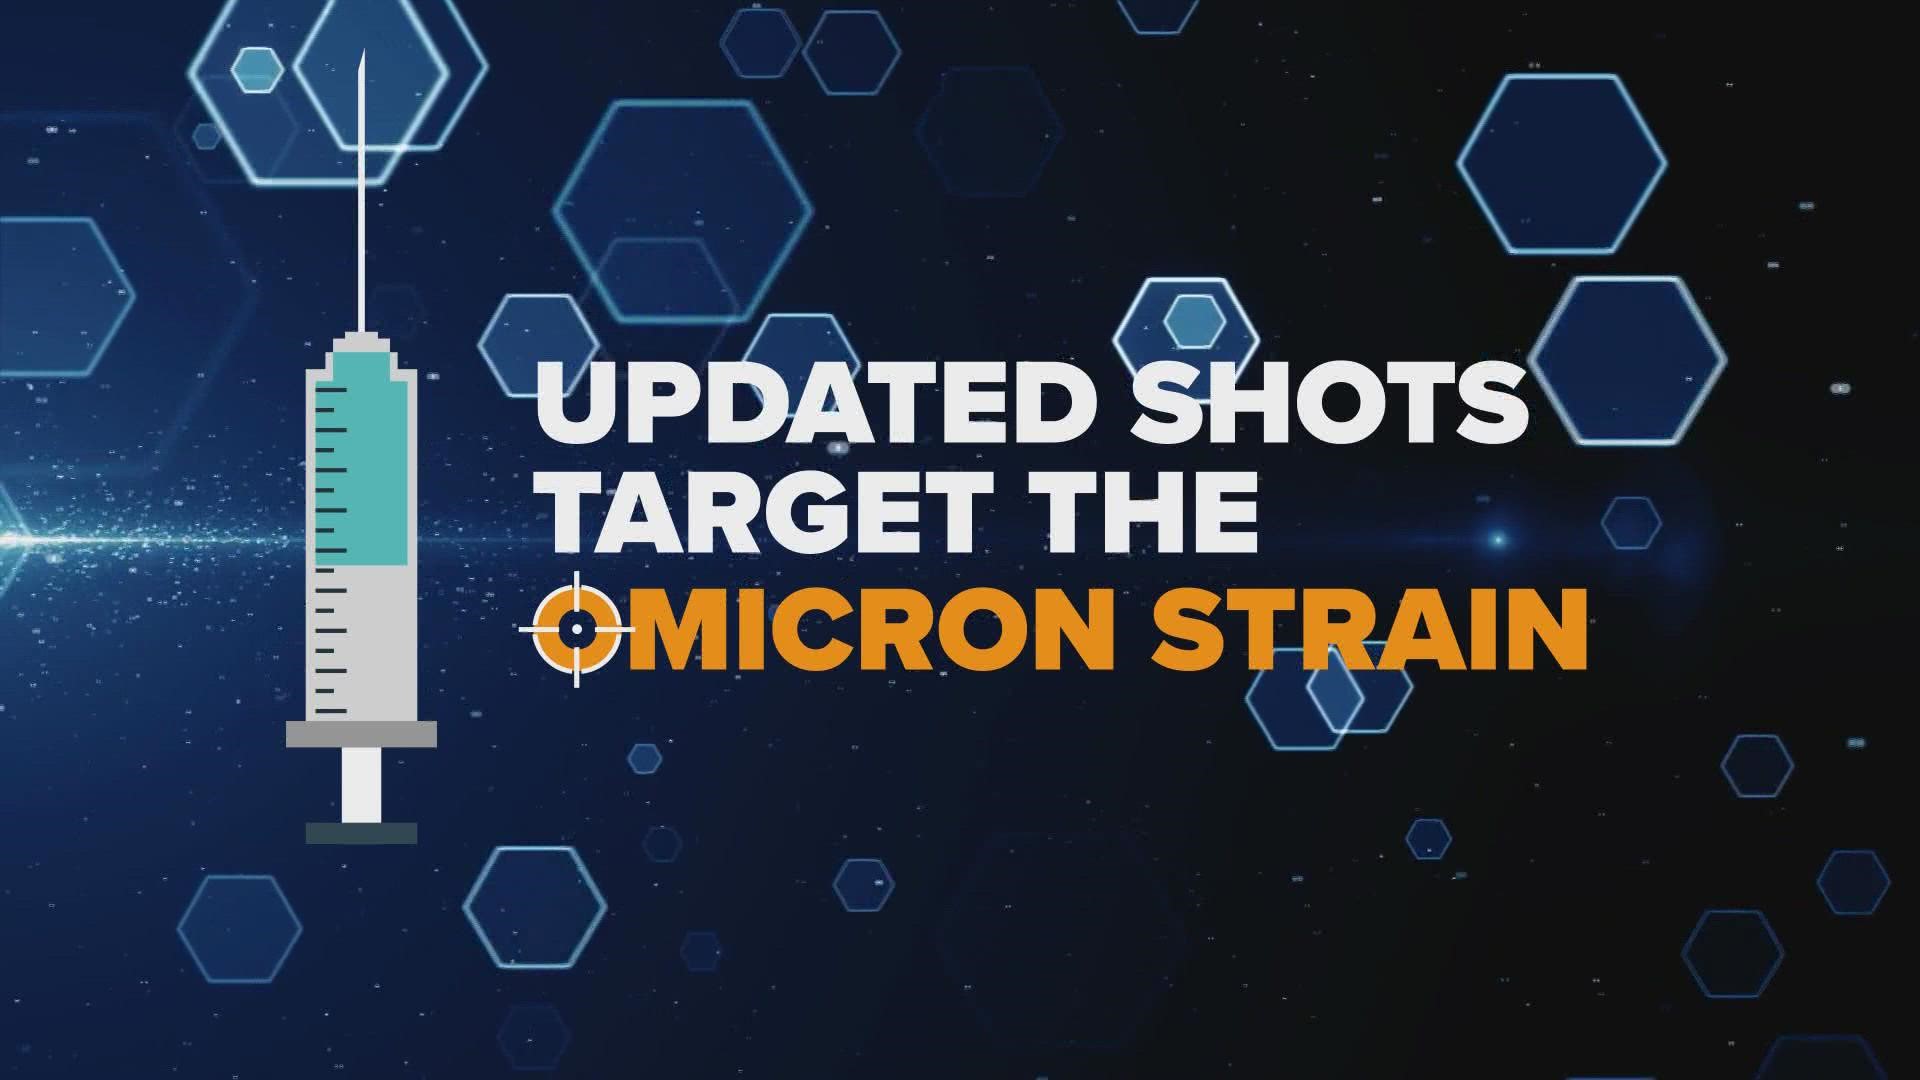 The upgraded shot is expected to target the omicron strain.